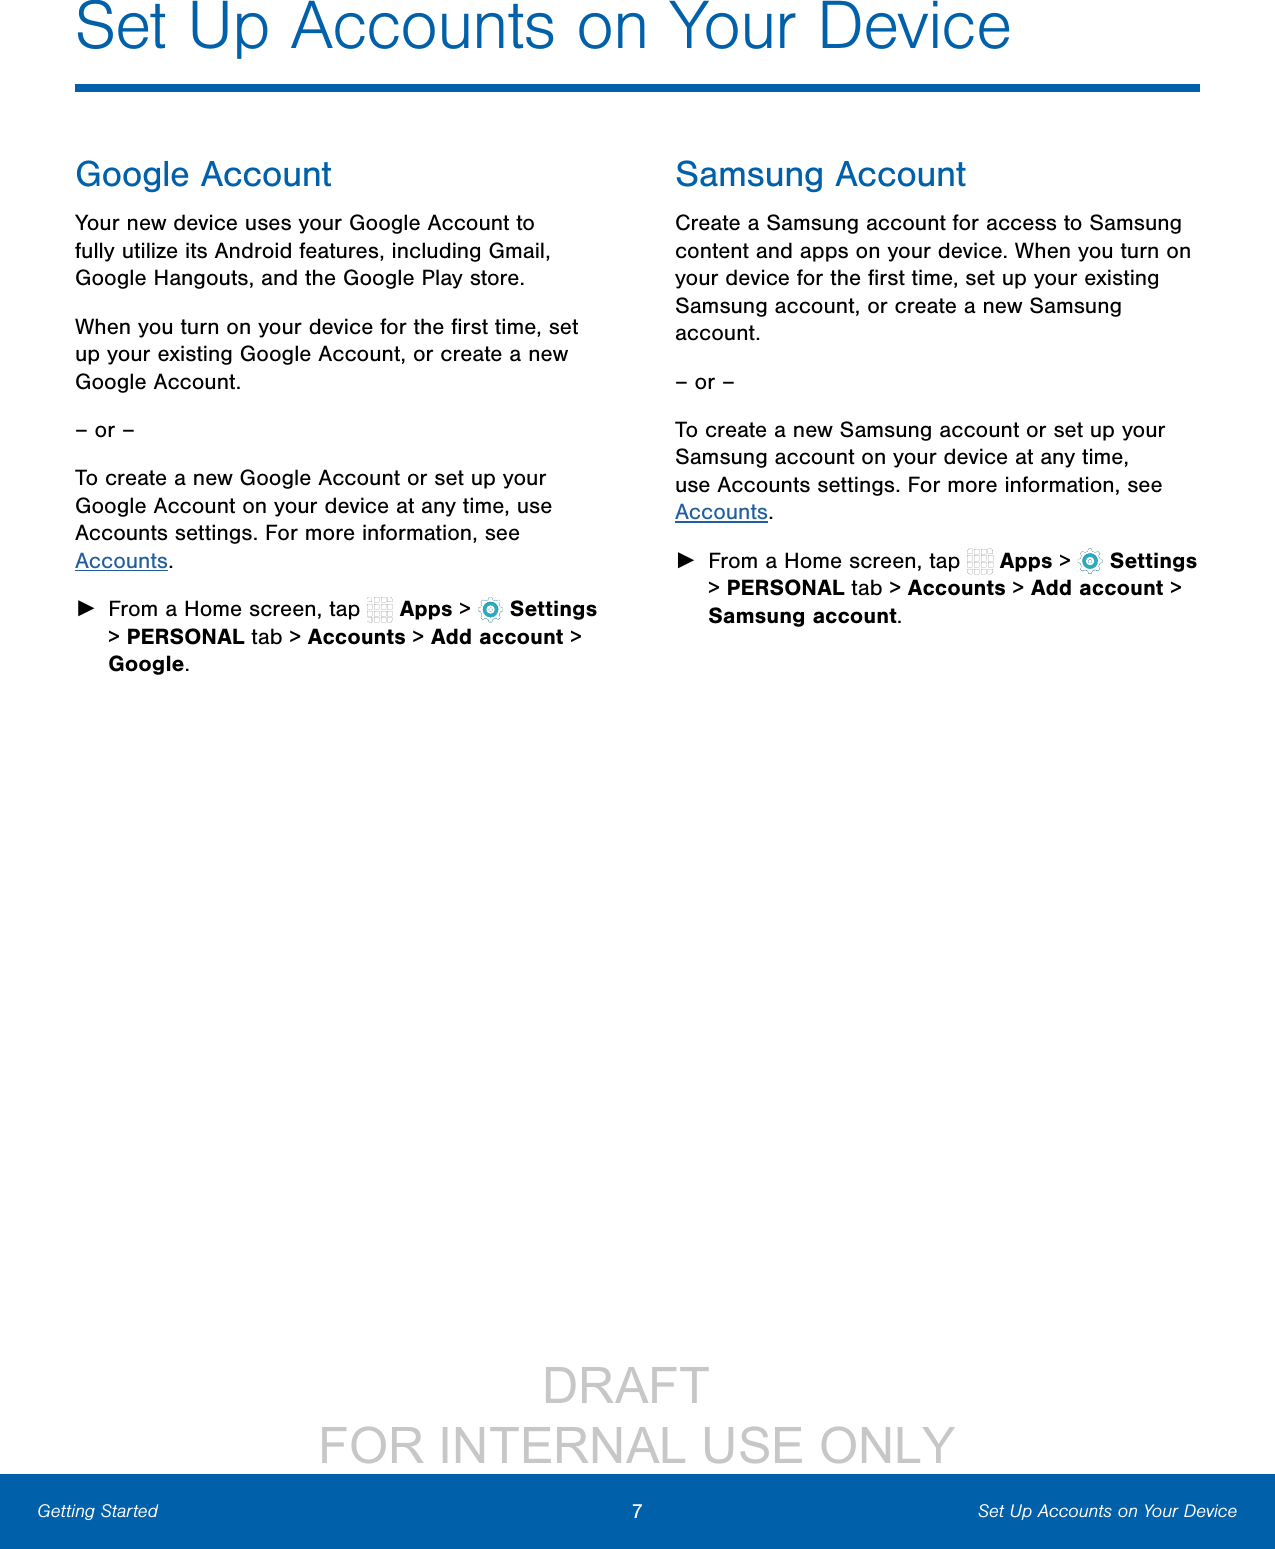                 DRAFT FOR INTERNAL USE ONLY7Set Up Accounts on Your DeviceGetting StartedGoogle AccountYour new device uses your Google Account to fully utilize its Android features, including Gmail, GoogleHangouts, and the Google Play store. When you turn on your device for the ﬁrst time, set up your existing Google Account, or create a new GoogleAccount.– or –To create a new Google Account or set up your Google Account on your device at any time, use Accounts settings. Formore information, see Accounts. ►From a Home screen, tap   Apps &gt;  Settings &gt; PERSONAL tab &gt; Accounts &gt; Add account &gt; Google.Samsung AccountCreate a Samsung account for access to Samsung content and apps on your device. When you turn on your device for the ﬁrst time, set up your existing Samsung account, or create a new Samsung account.– or –To create a new Samsung account or set up your Samsung account on your device at any time, use Accounts settings. Formore information, see Accounts. ►From a Home screen, tap   Apps &gt;  Settings &gt; PERSONAL tab &gt; Accounts &gt; Add account &gt; Samsungaccount.Set Up Accounts on Your Device